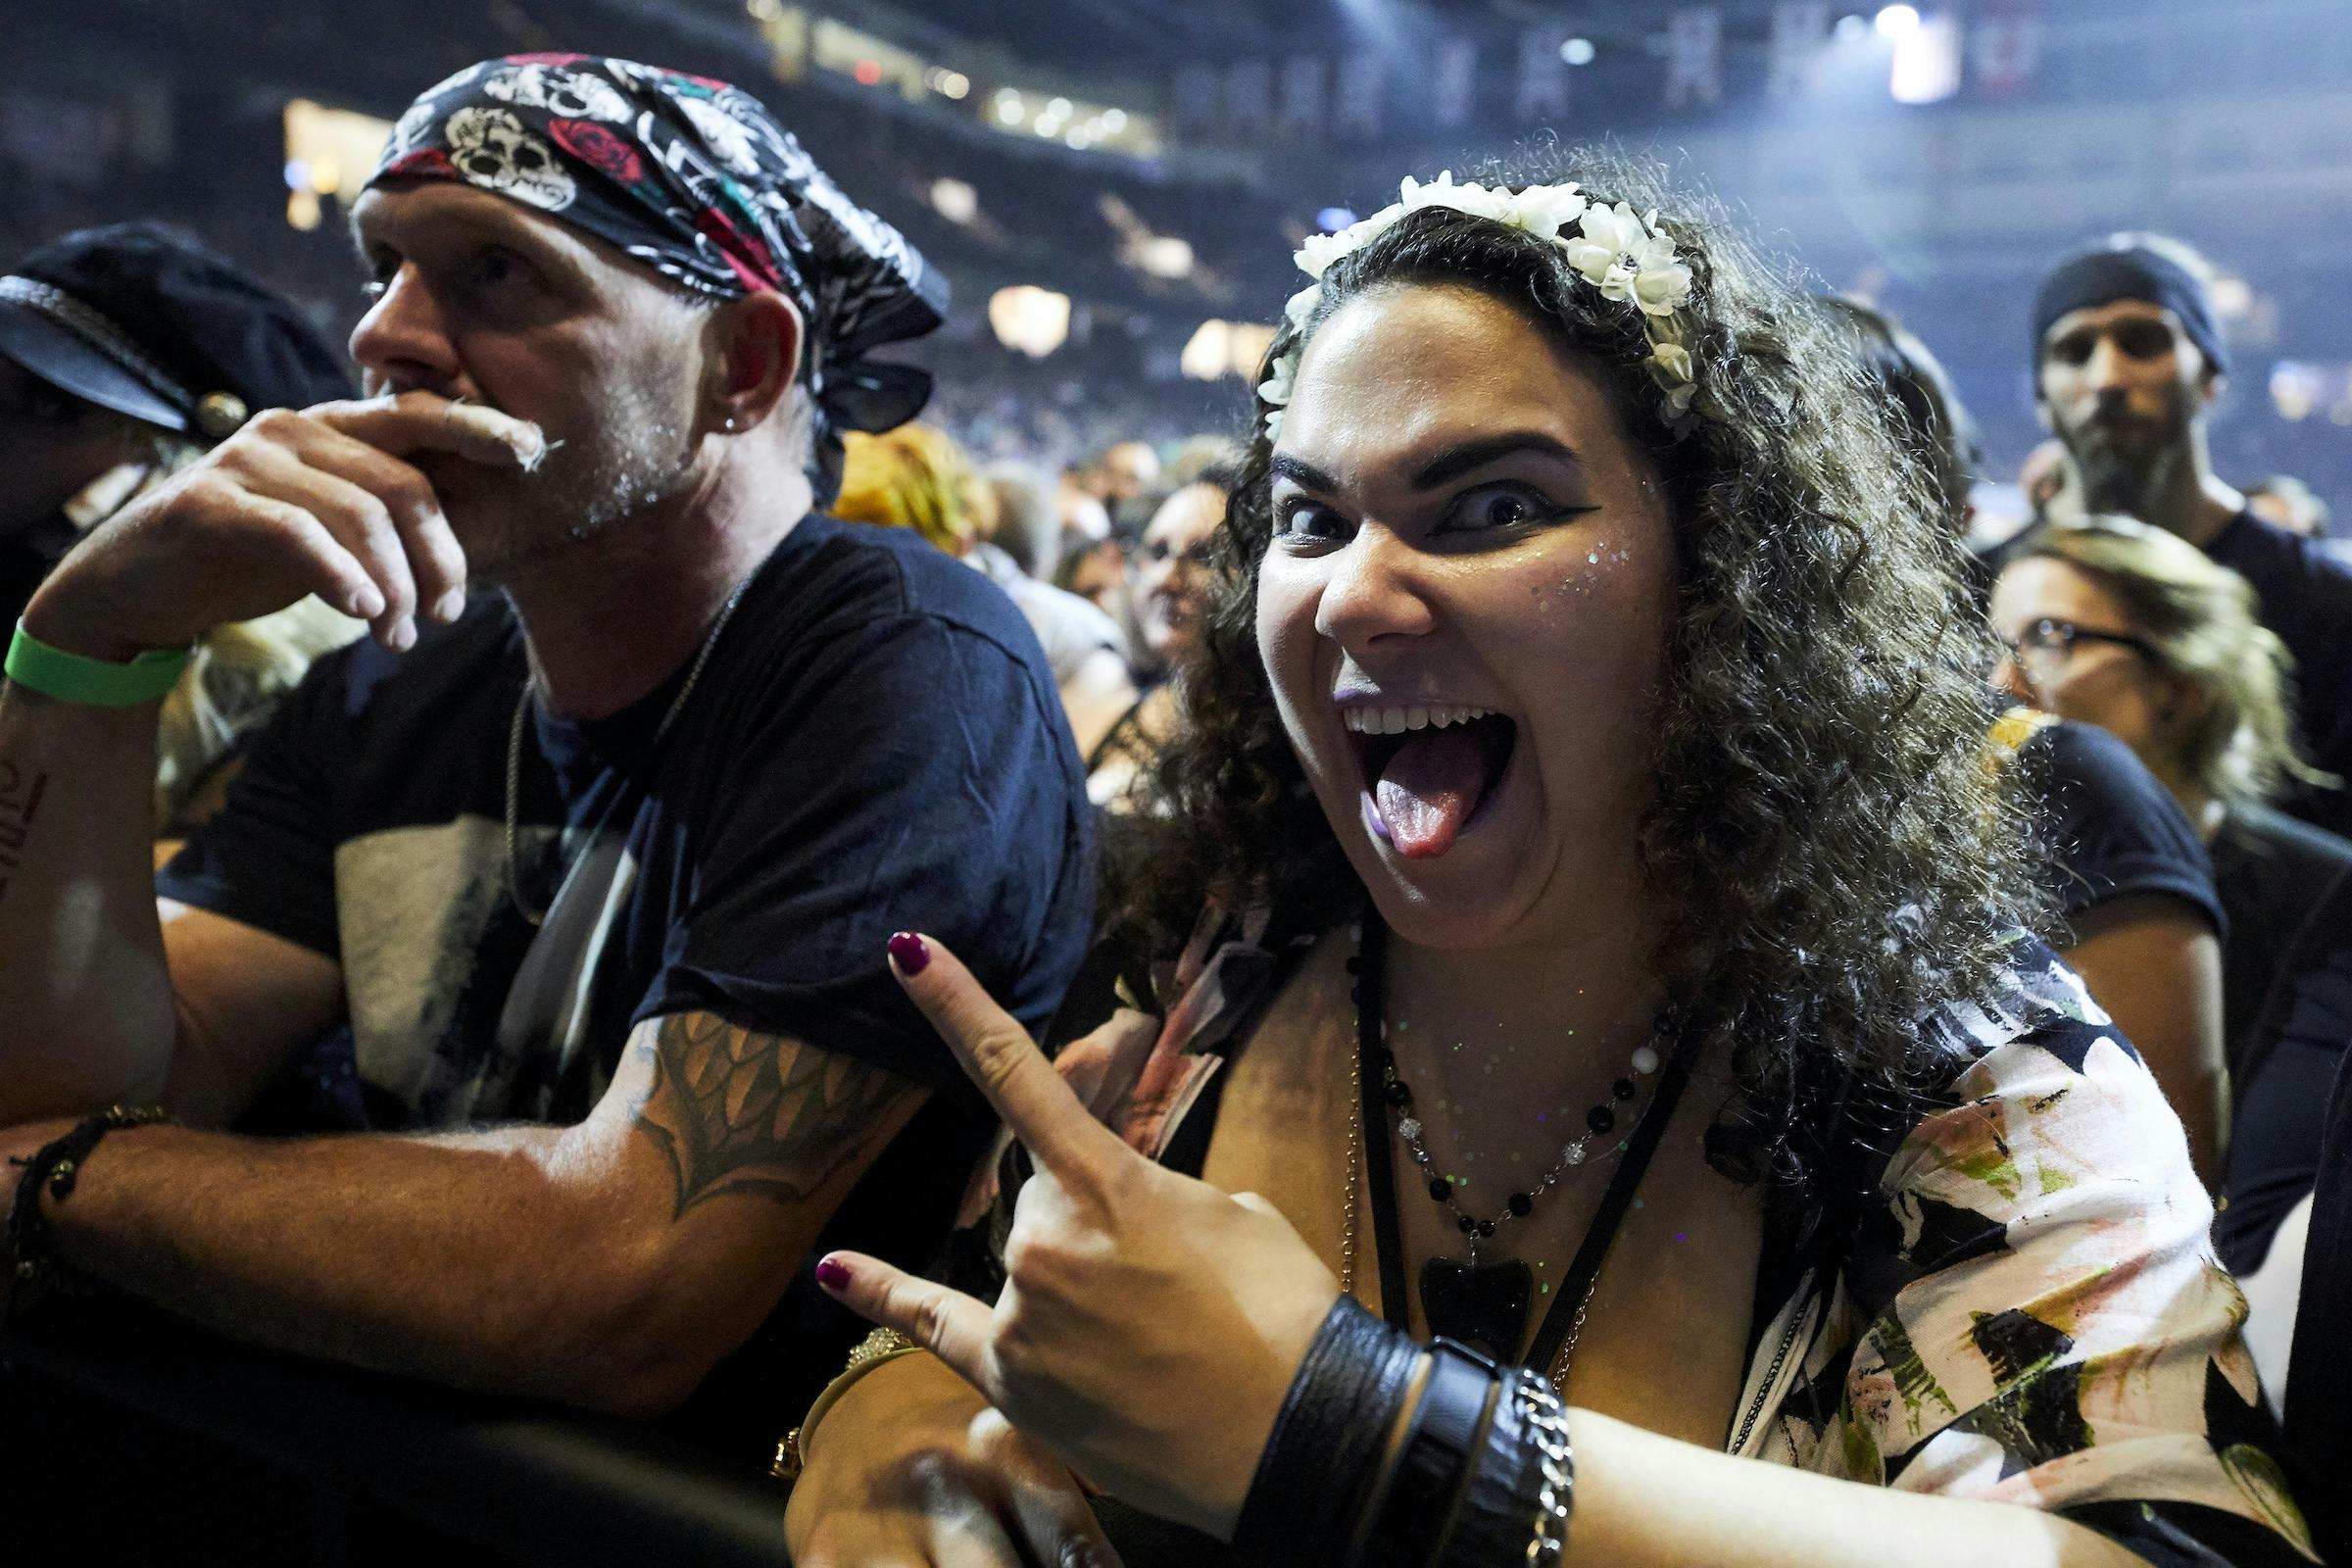 Heavy Metal Is Good For Your Health, According To Recent Study